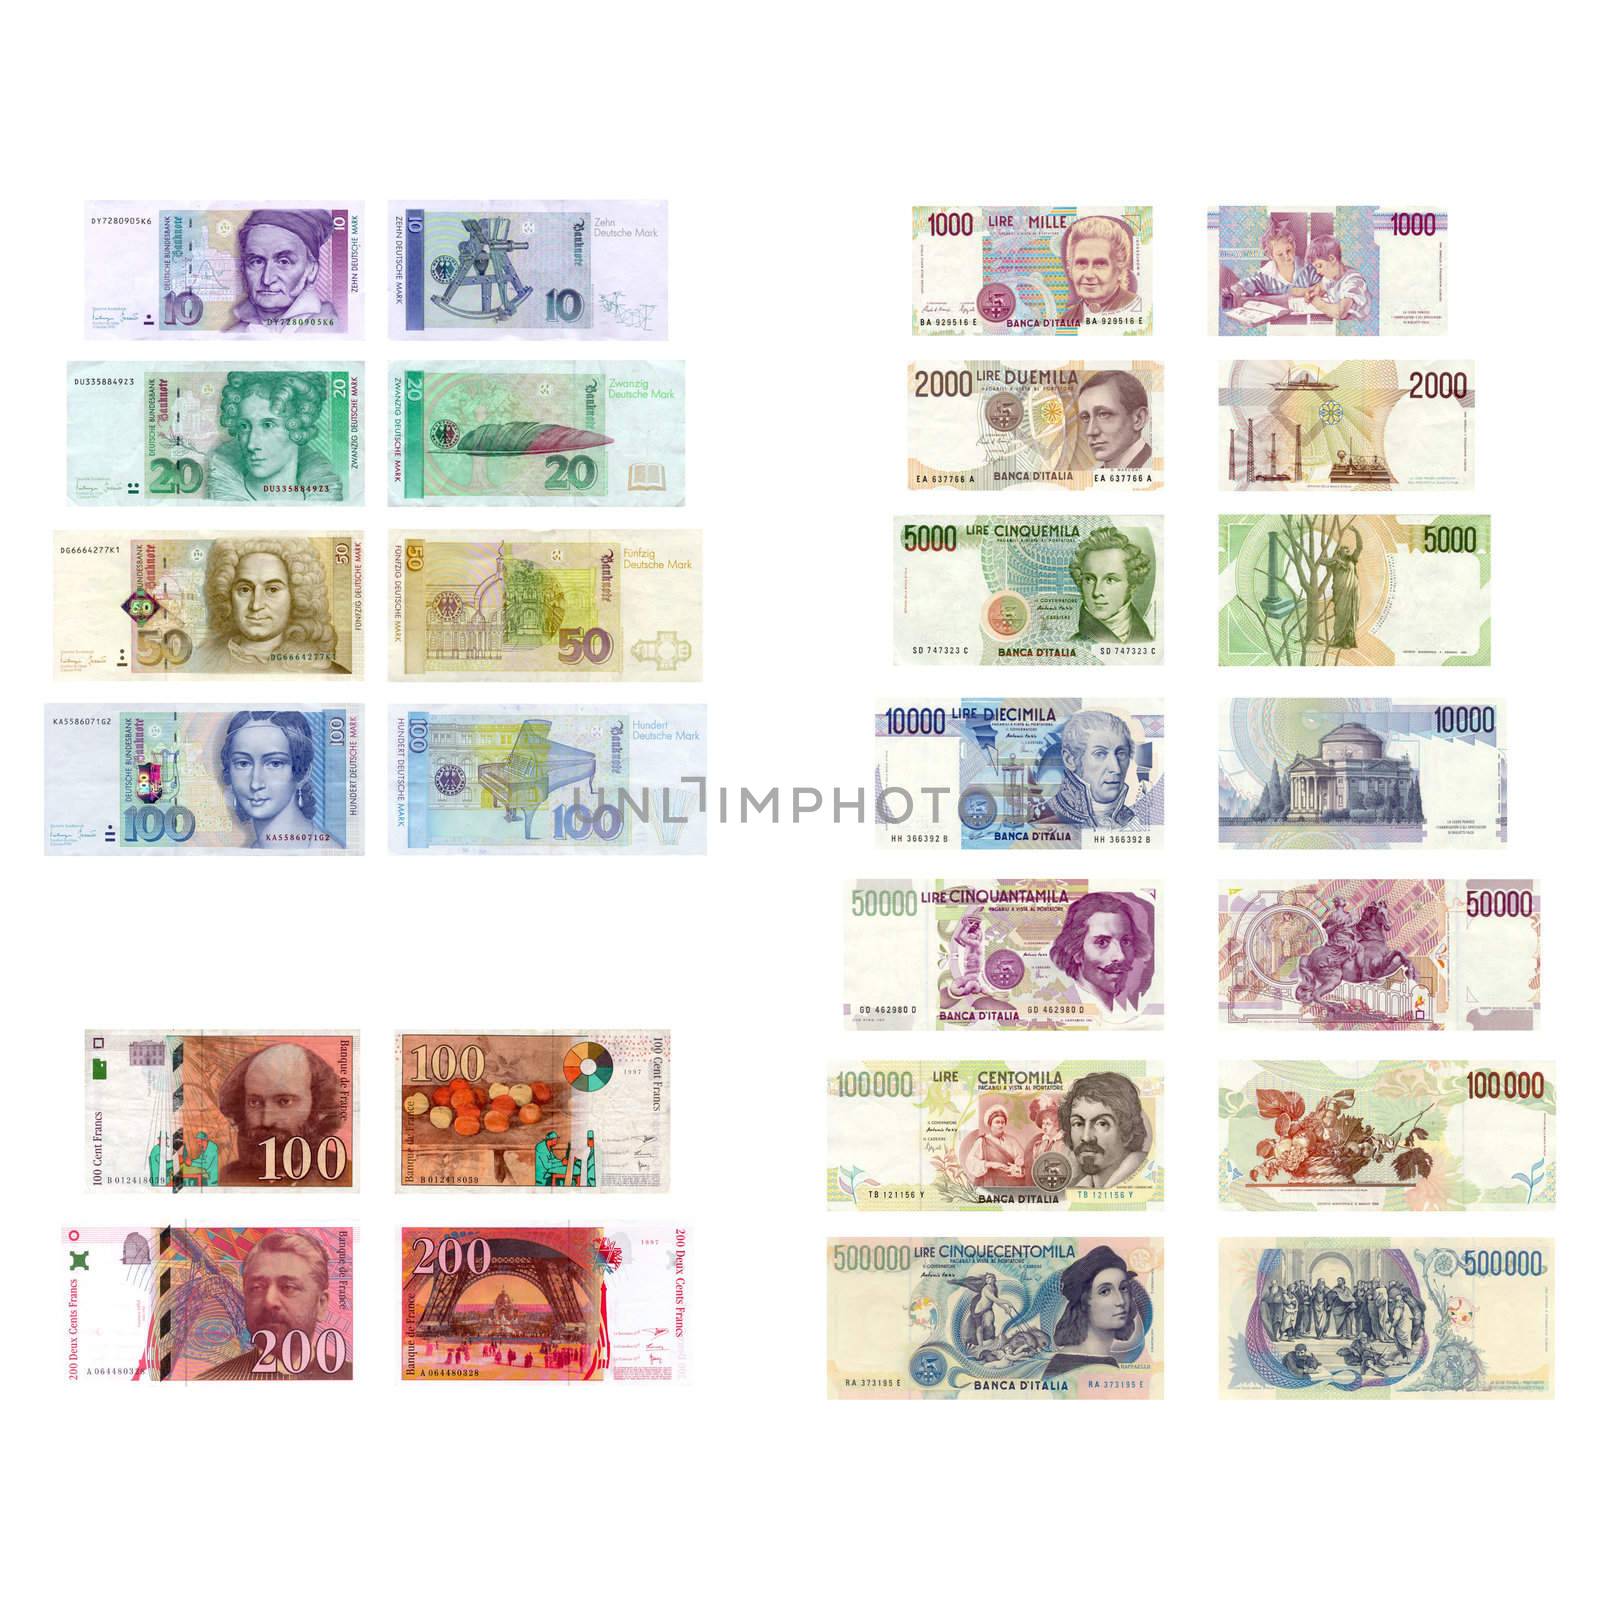 Old european currency by claudiodivizia